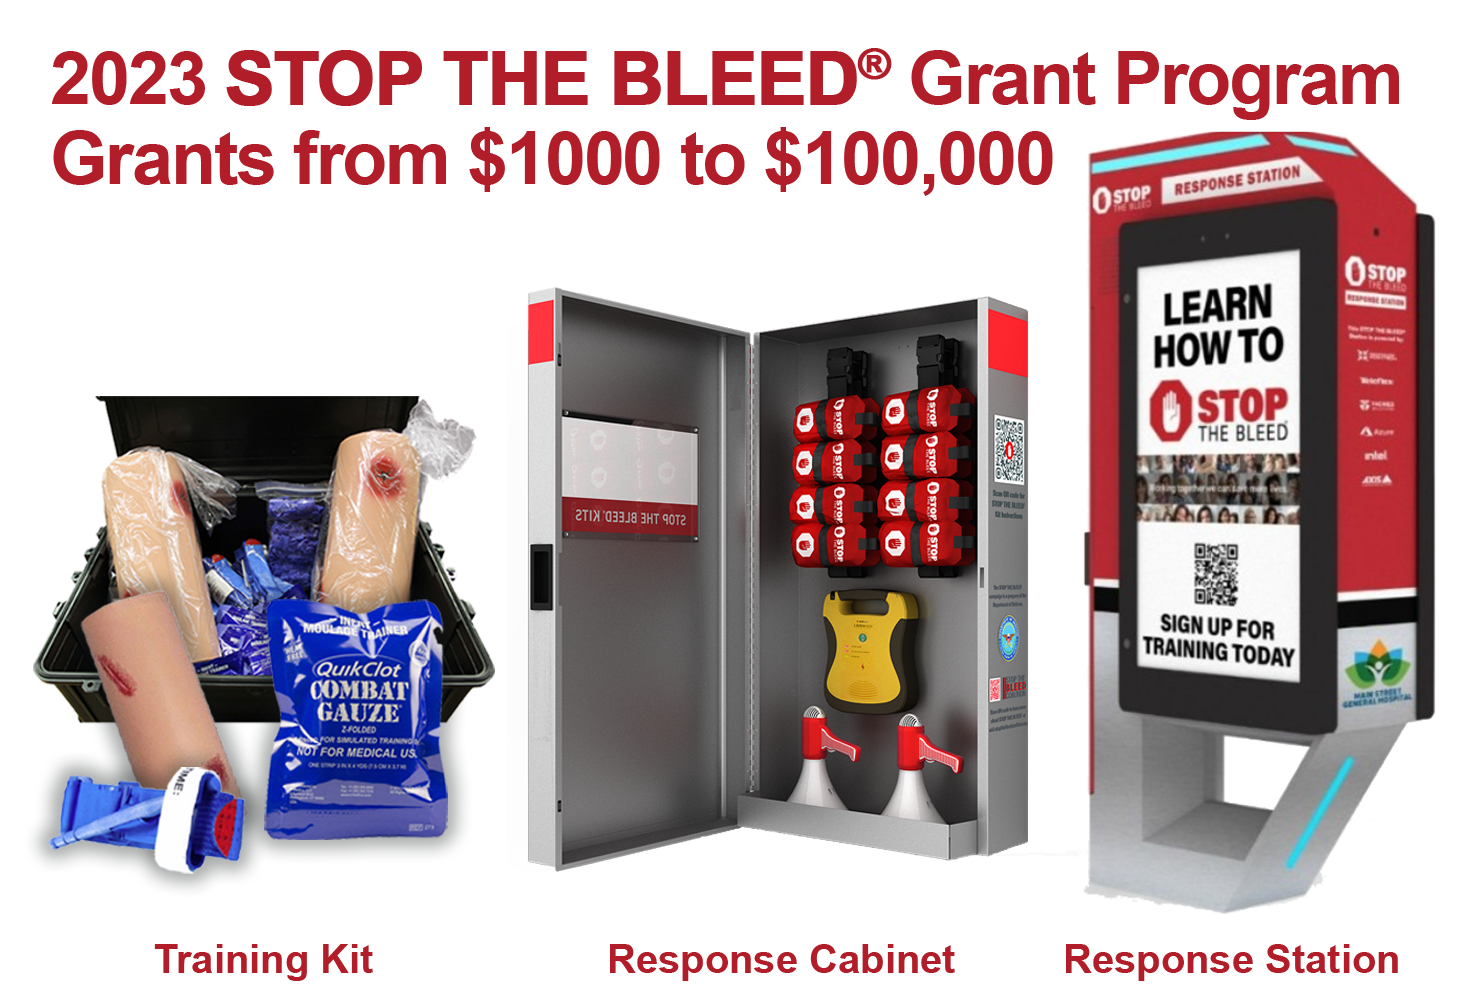 The 2023 STOP THE BLEED® Grant Program Launches The Marketing